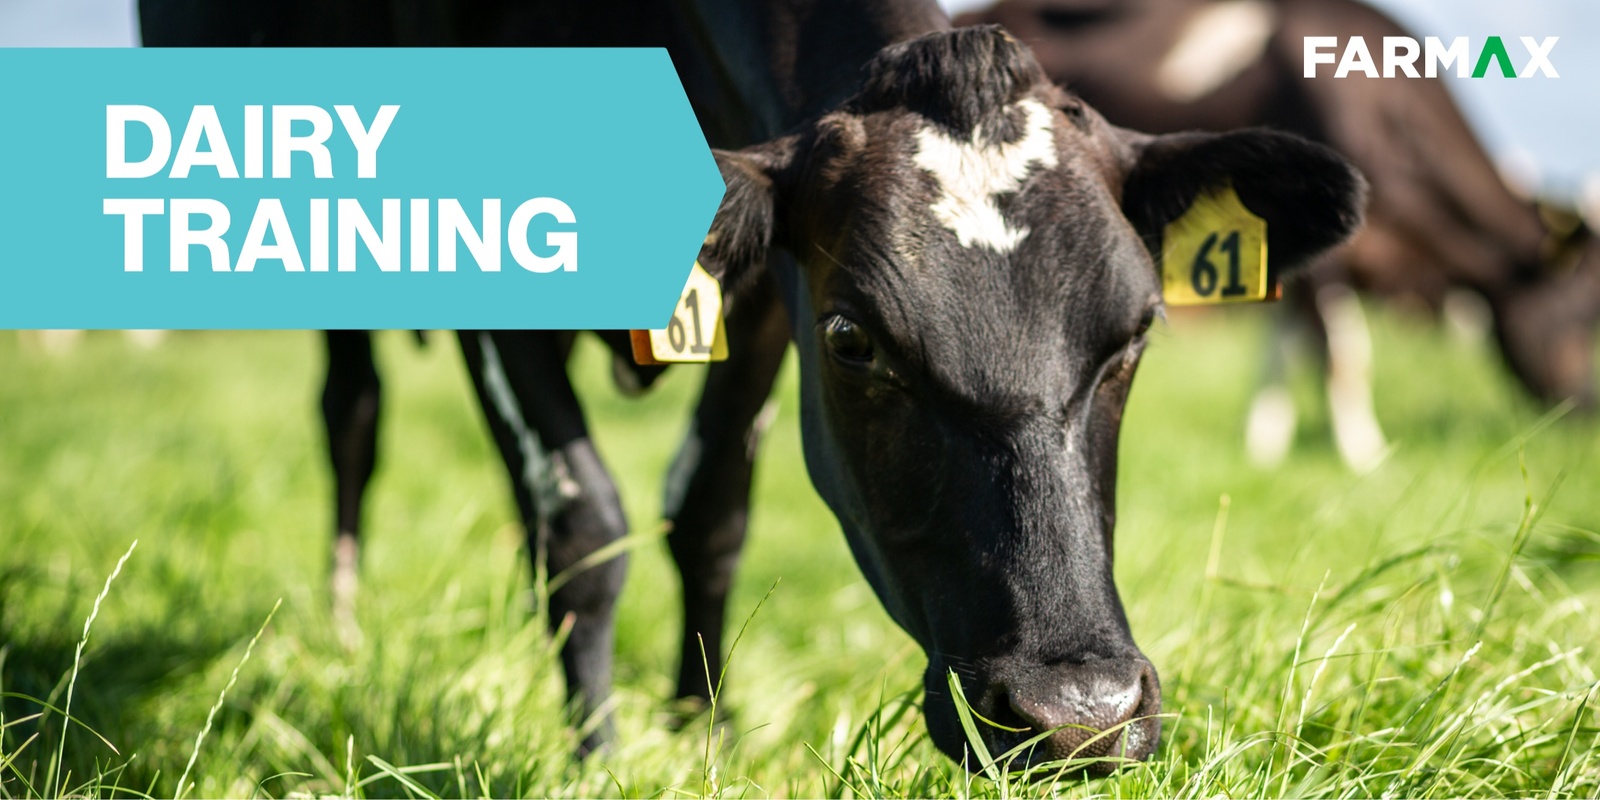 Banner image for New Plymouth FARMAX Dairy Training